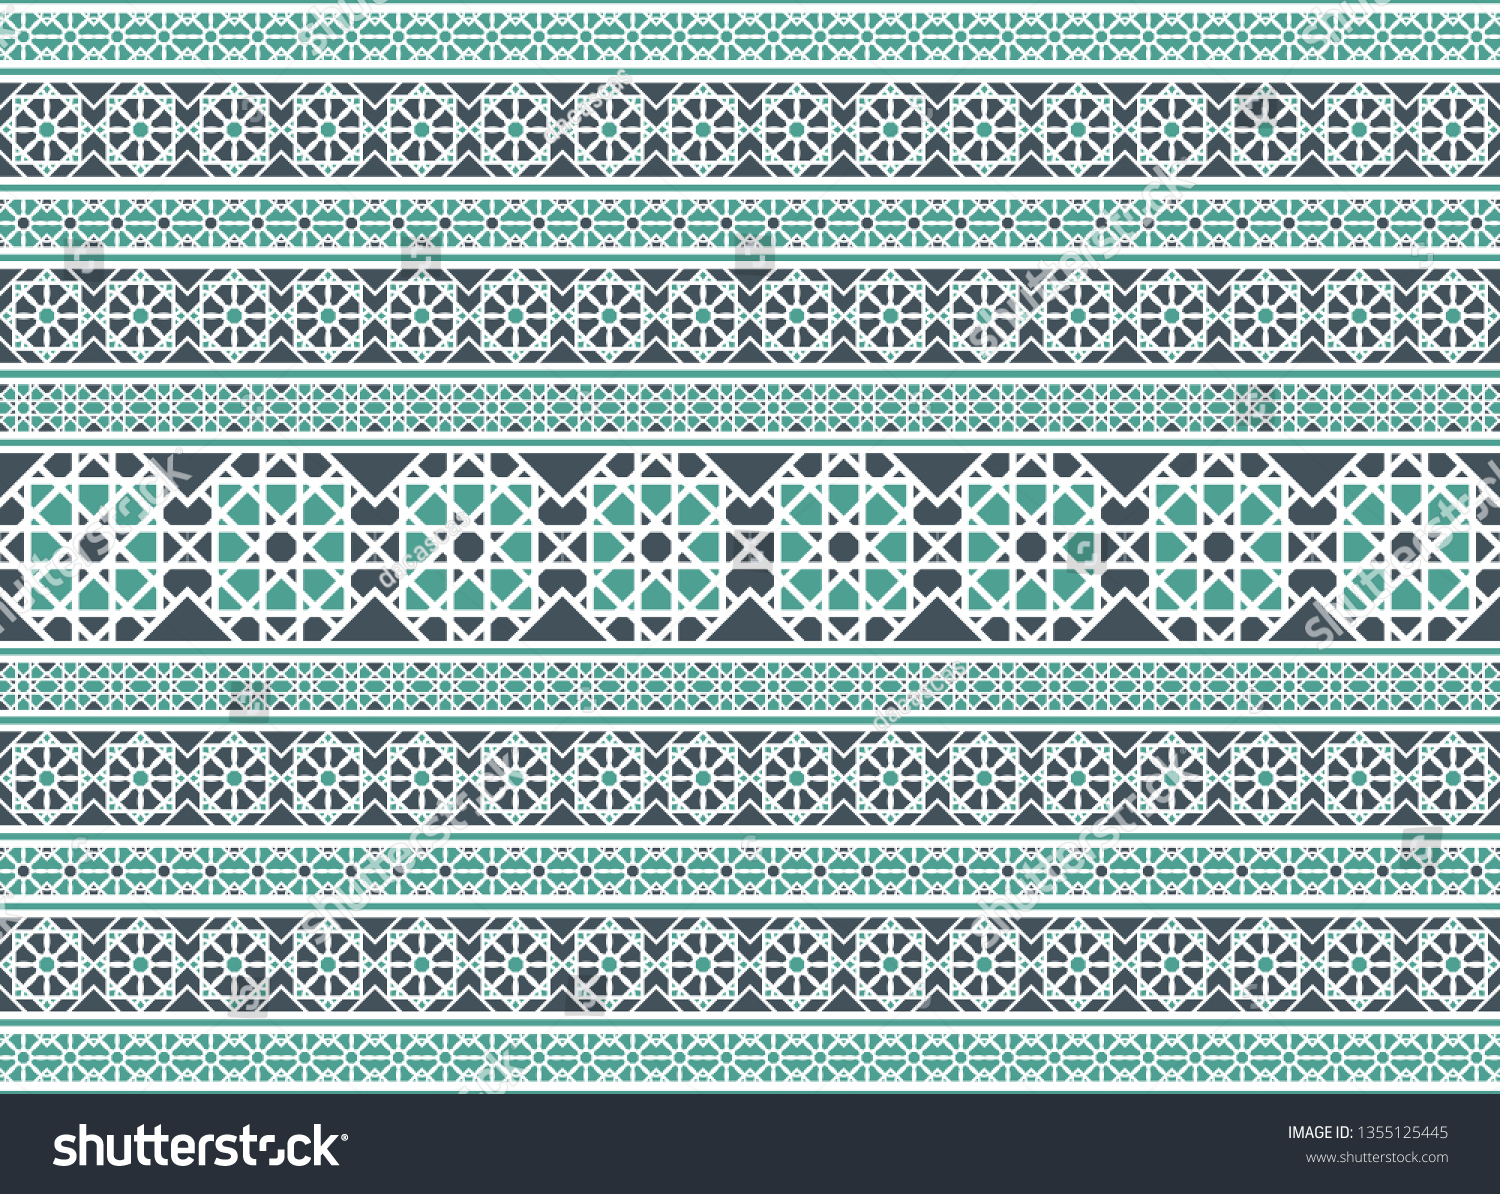 Seamless texture with luxury arabic ornament. Vector border pattern #1355125445